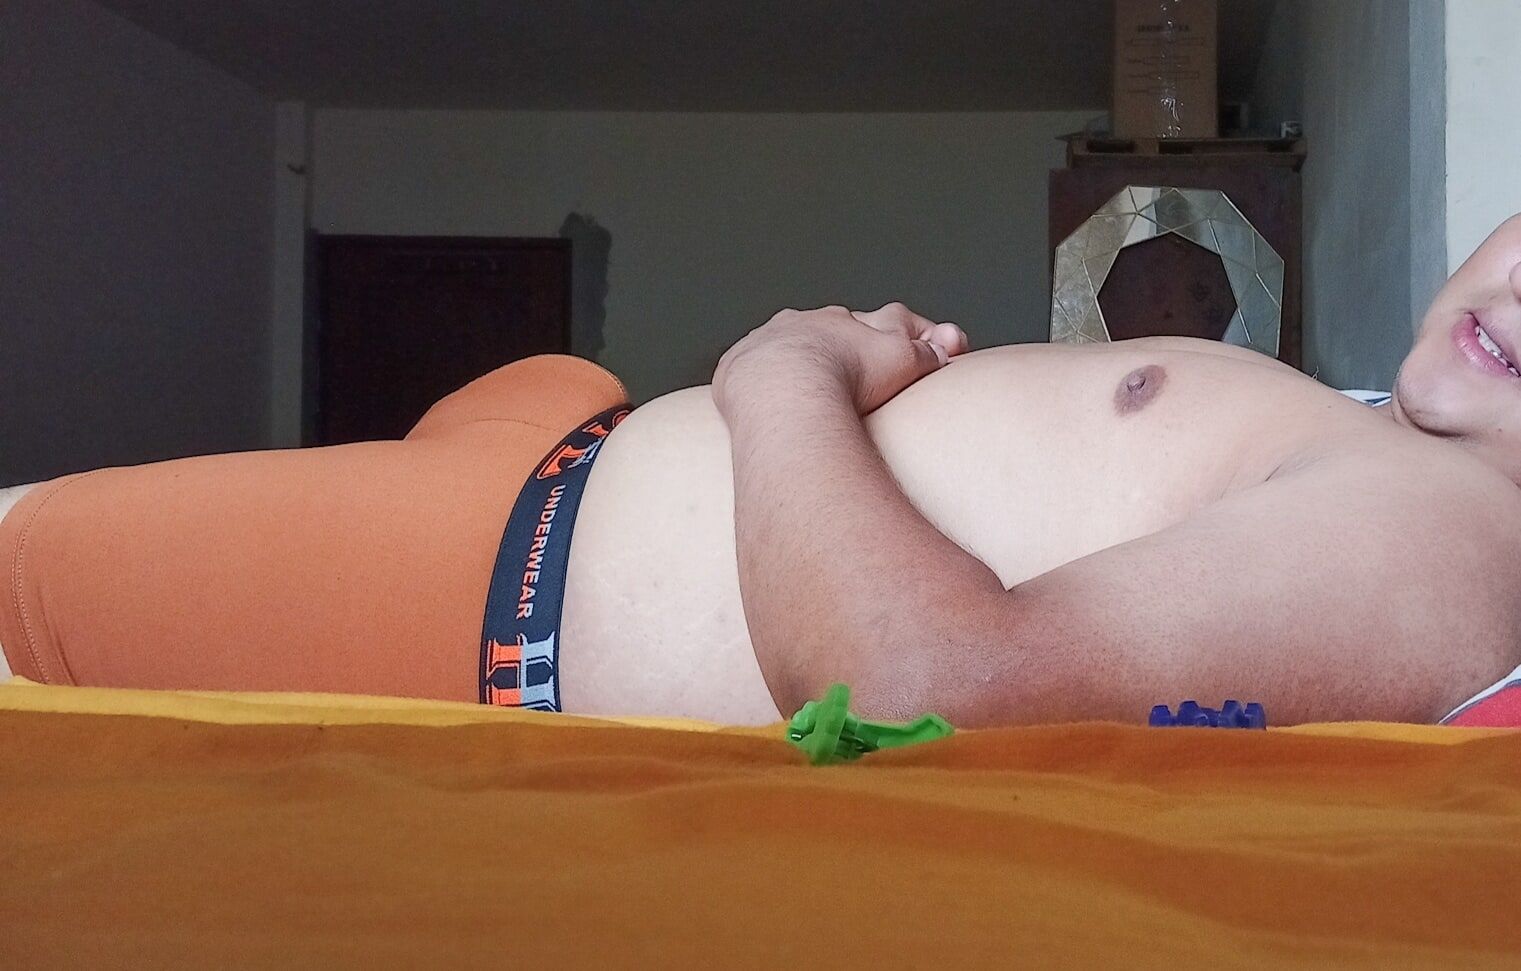 Me Lying Down and my Penis Standing - 01 (In Underwear) #18